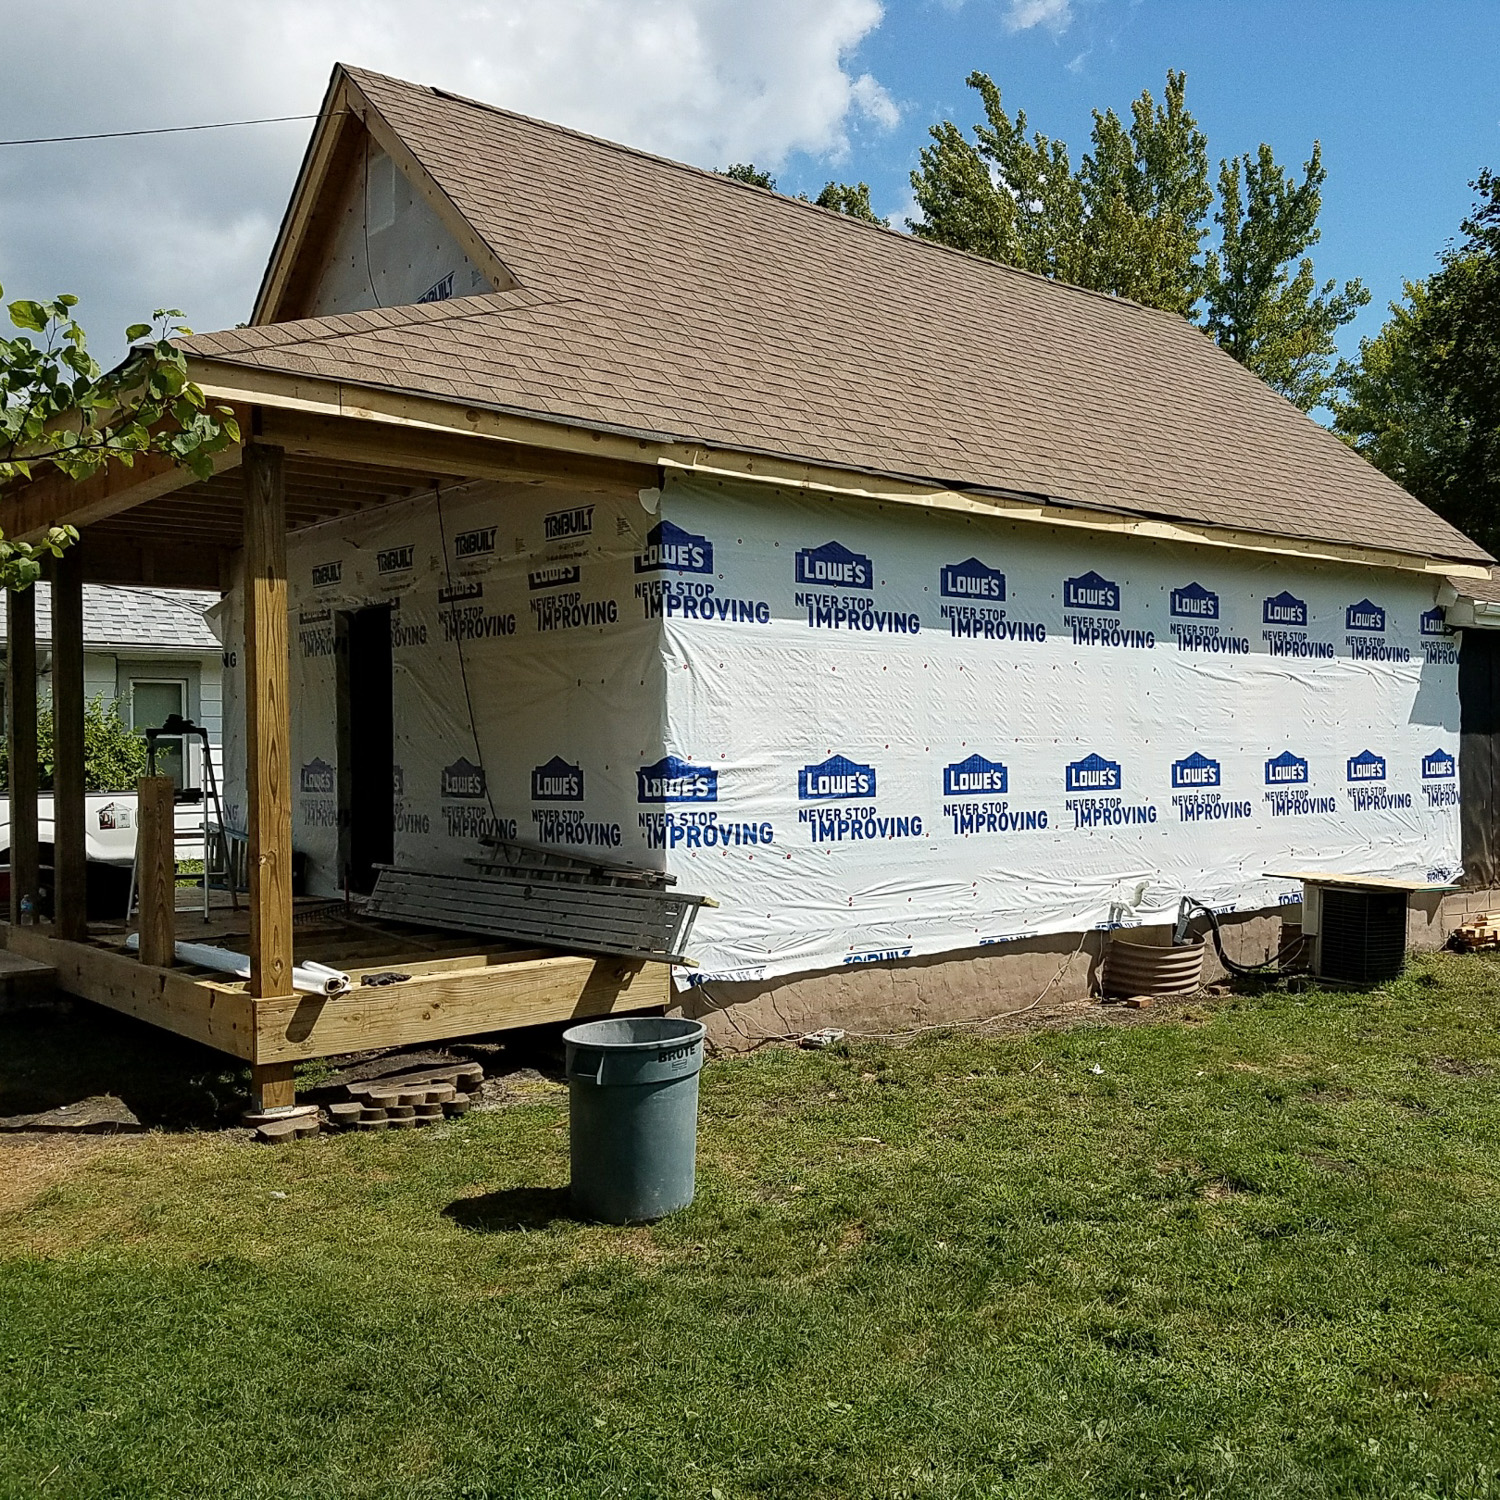 house during wind damage restoration process. House framed, new roof installed, no siding yet, during construction.